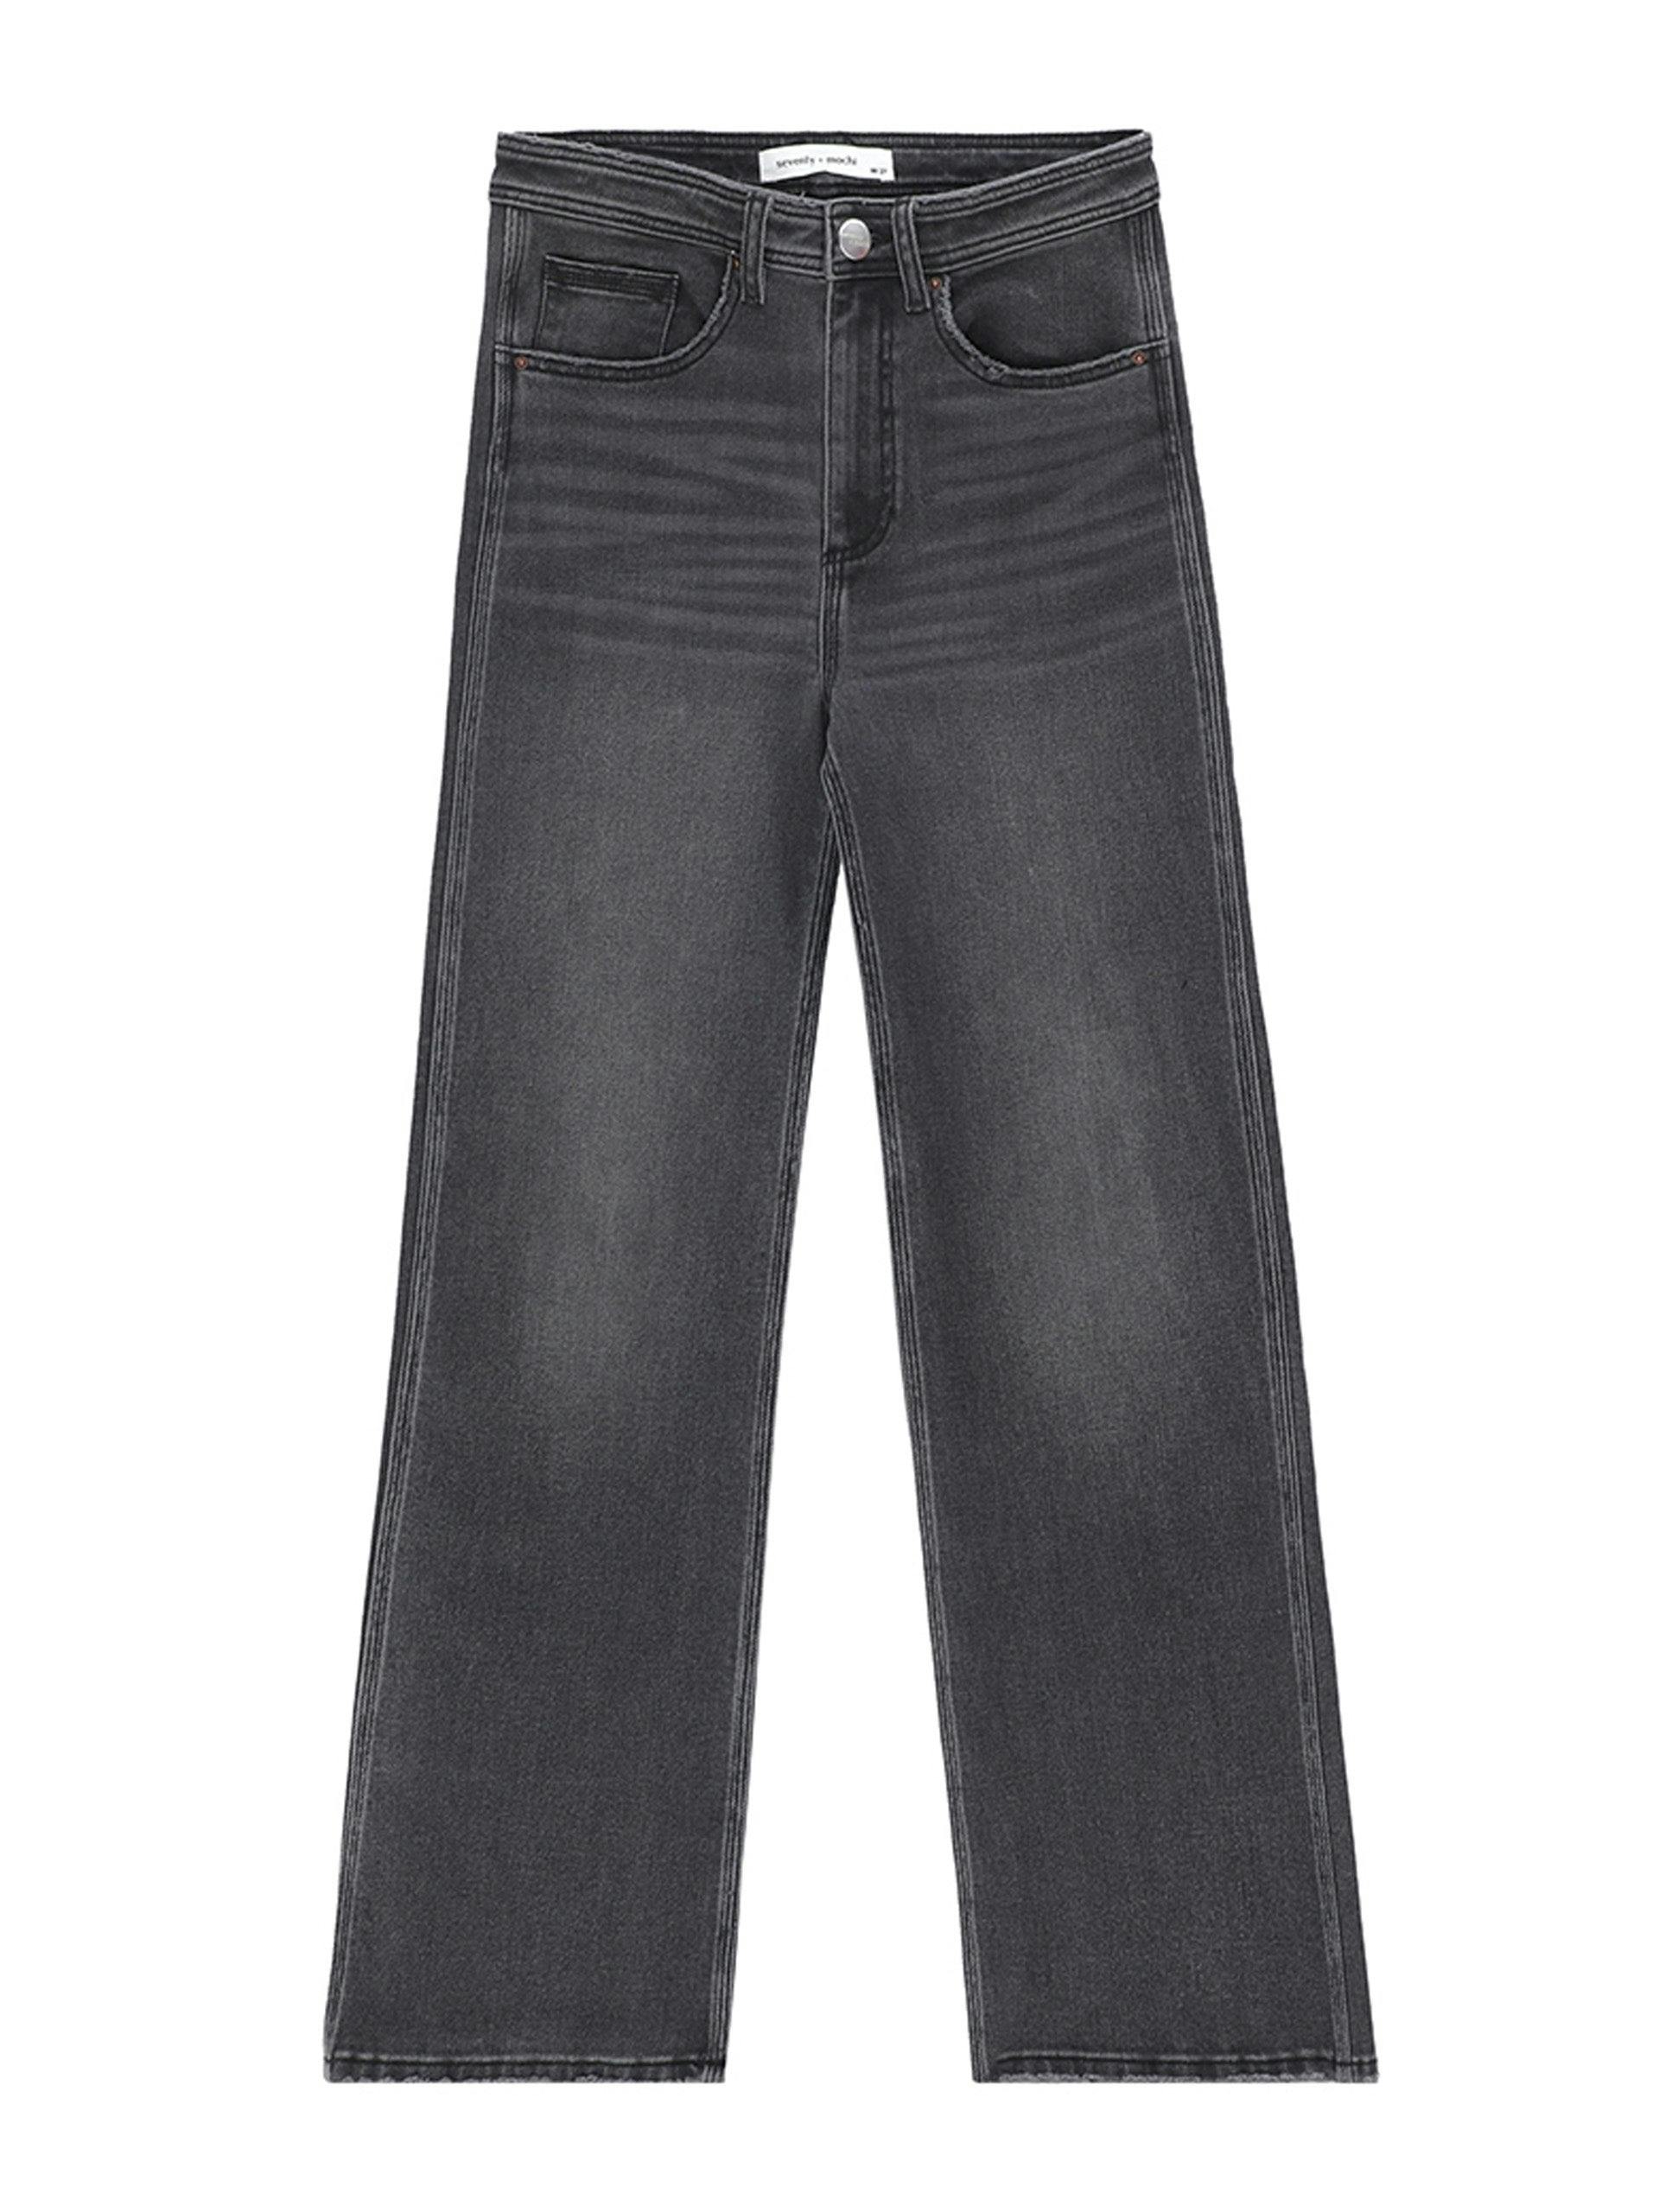 Washed charcoal Mabel jean